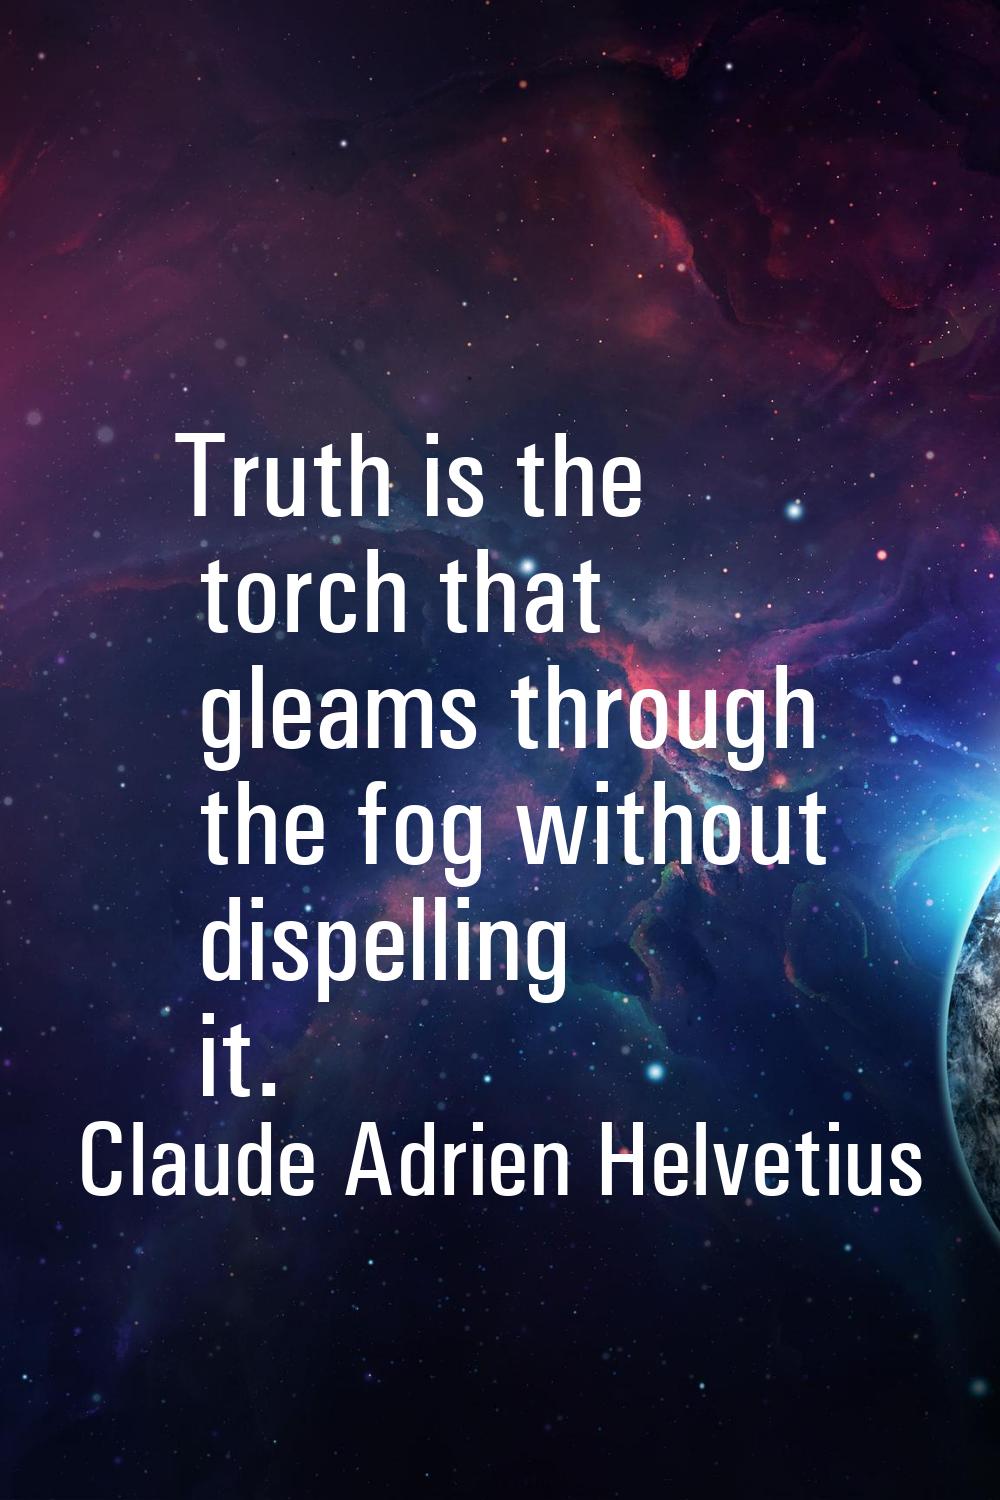 Truth is the torch that gleams through the fog without dispelling it.